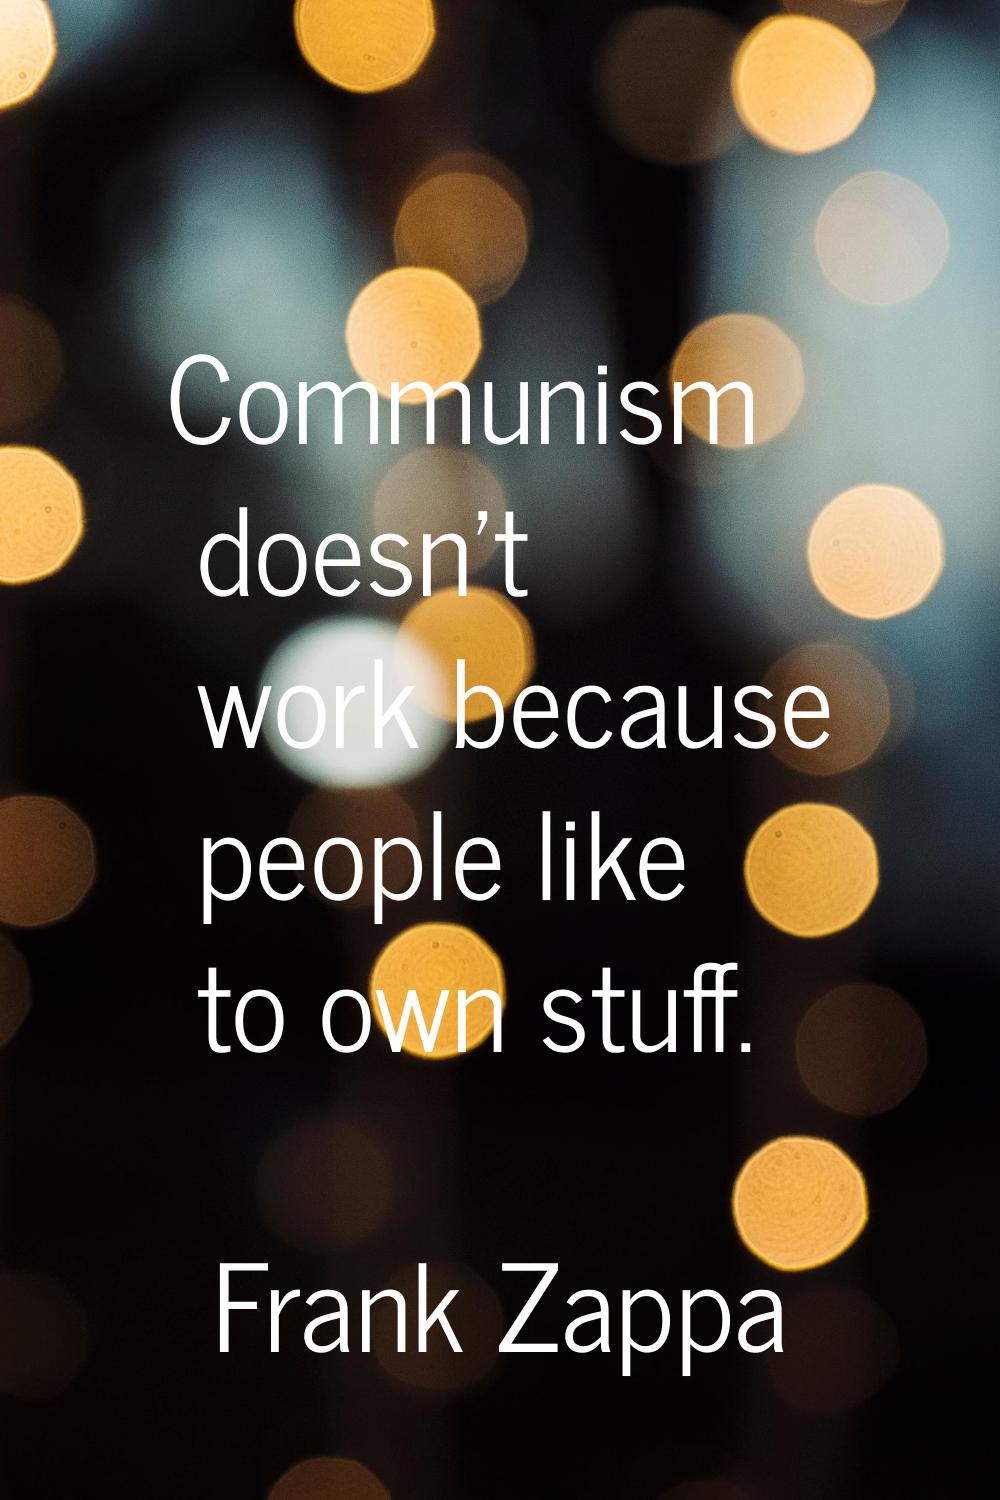 Communism doesn't work because people like to own stuff.